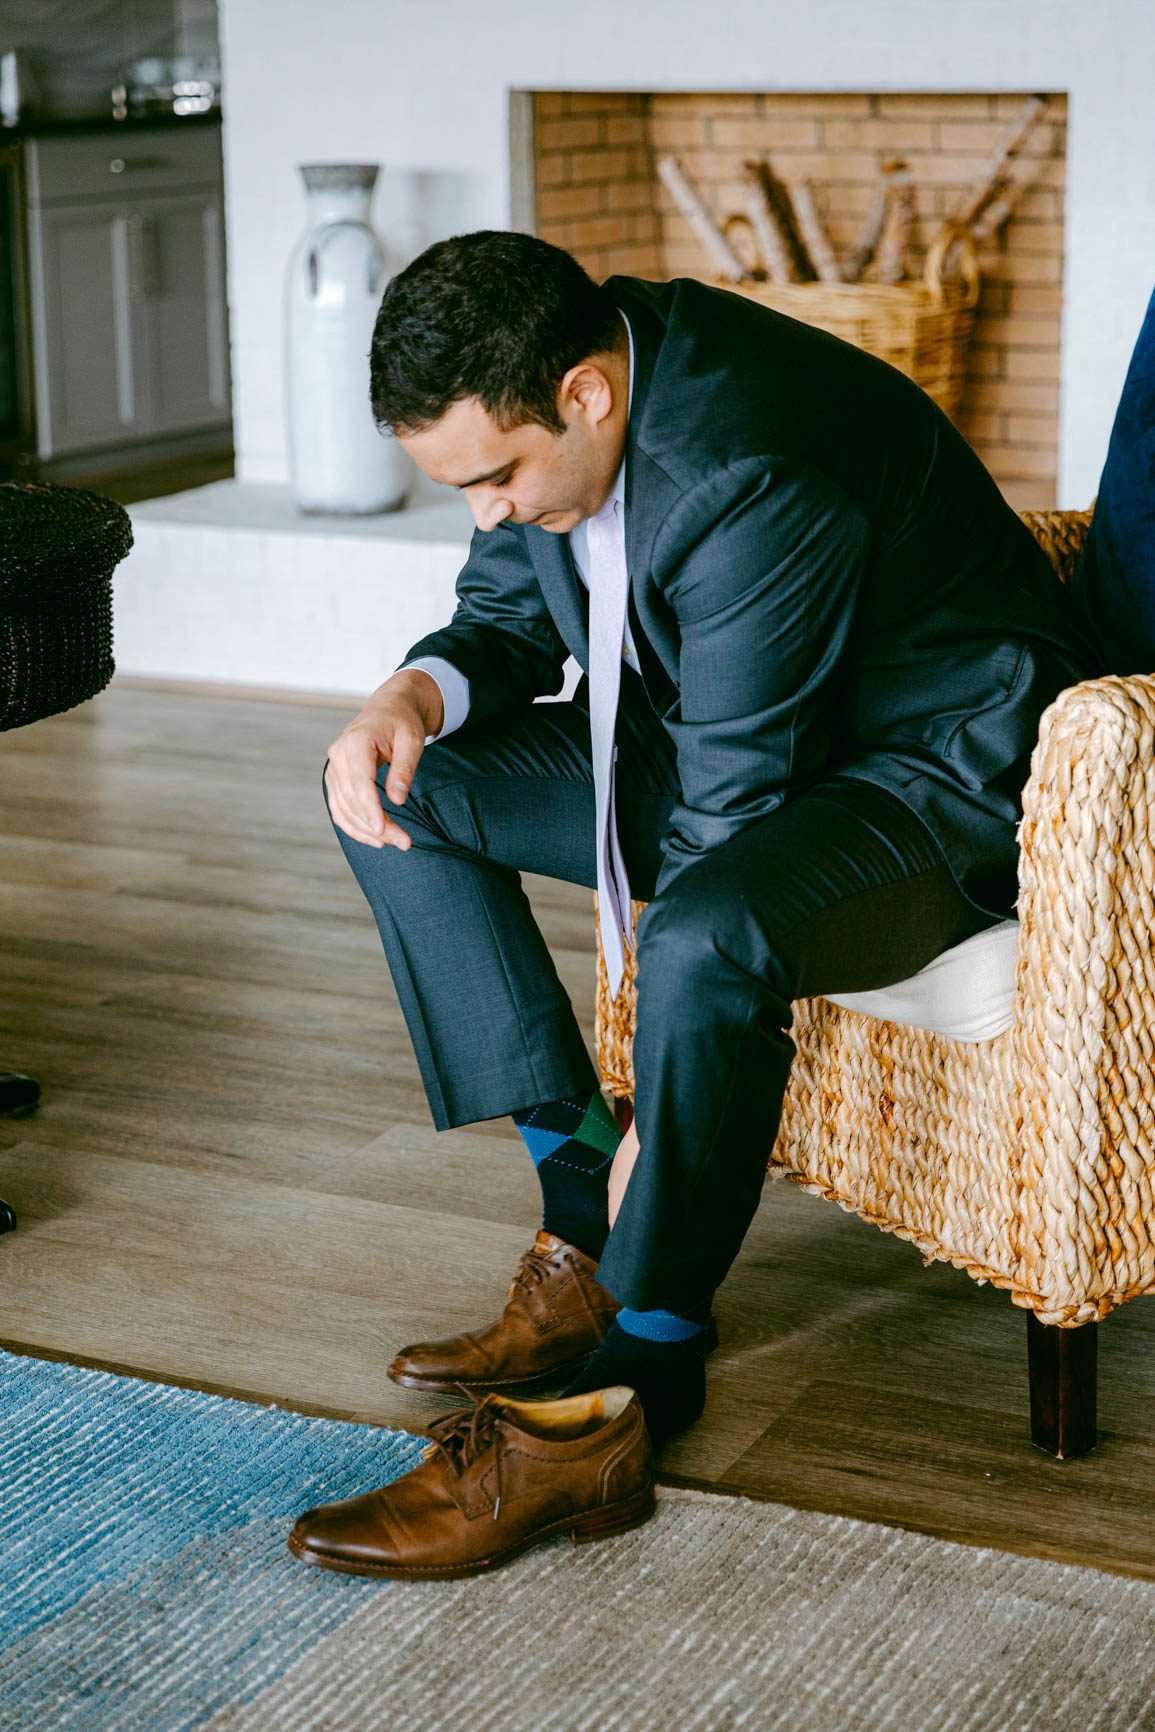 groom putting shoes on at a lake house elopement shot by Nhieu Tang Photography | nhieutang.com